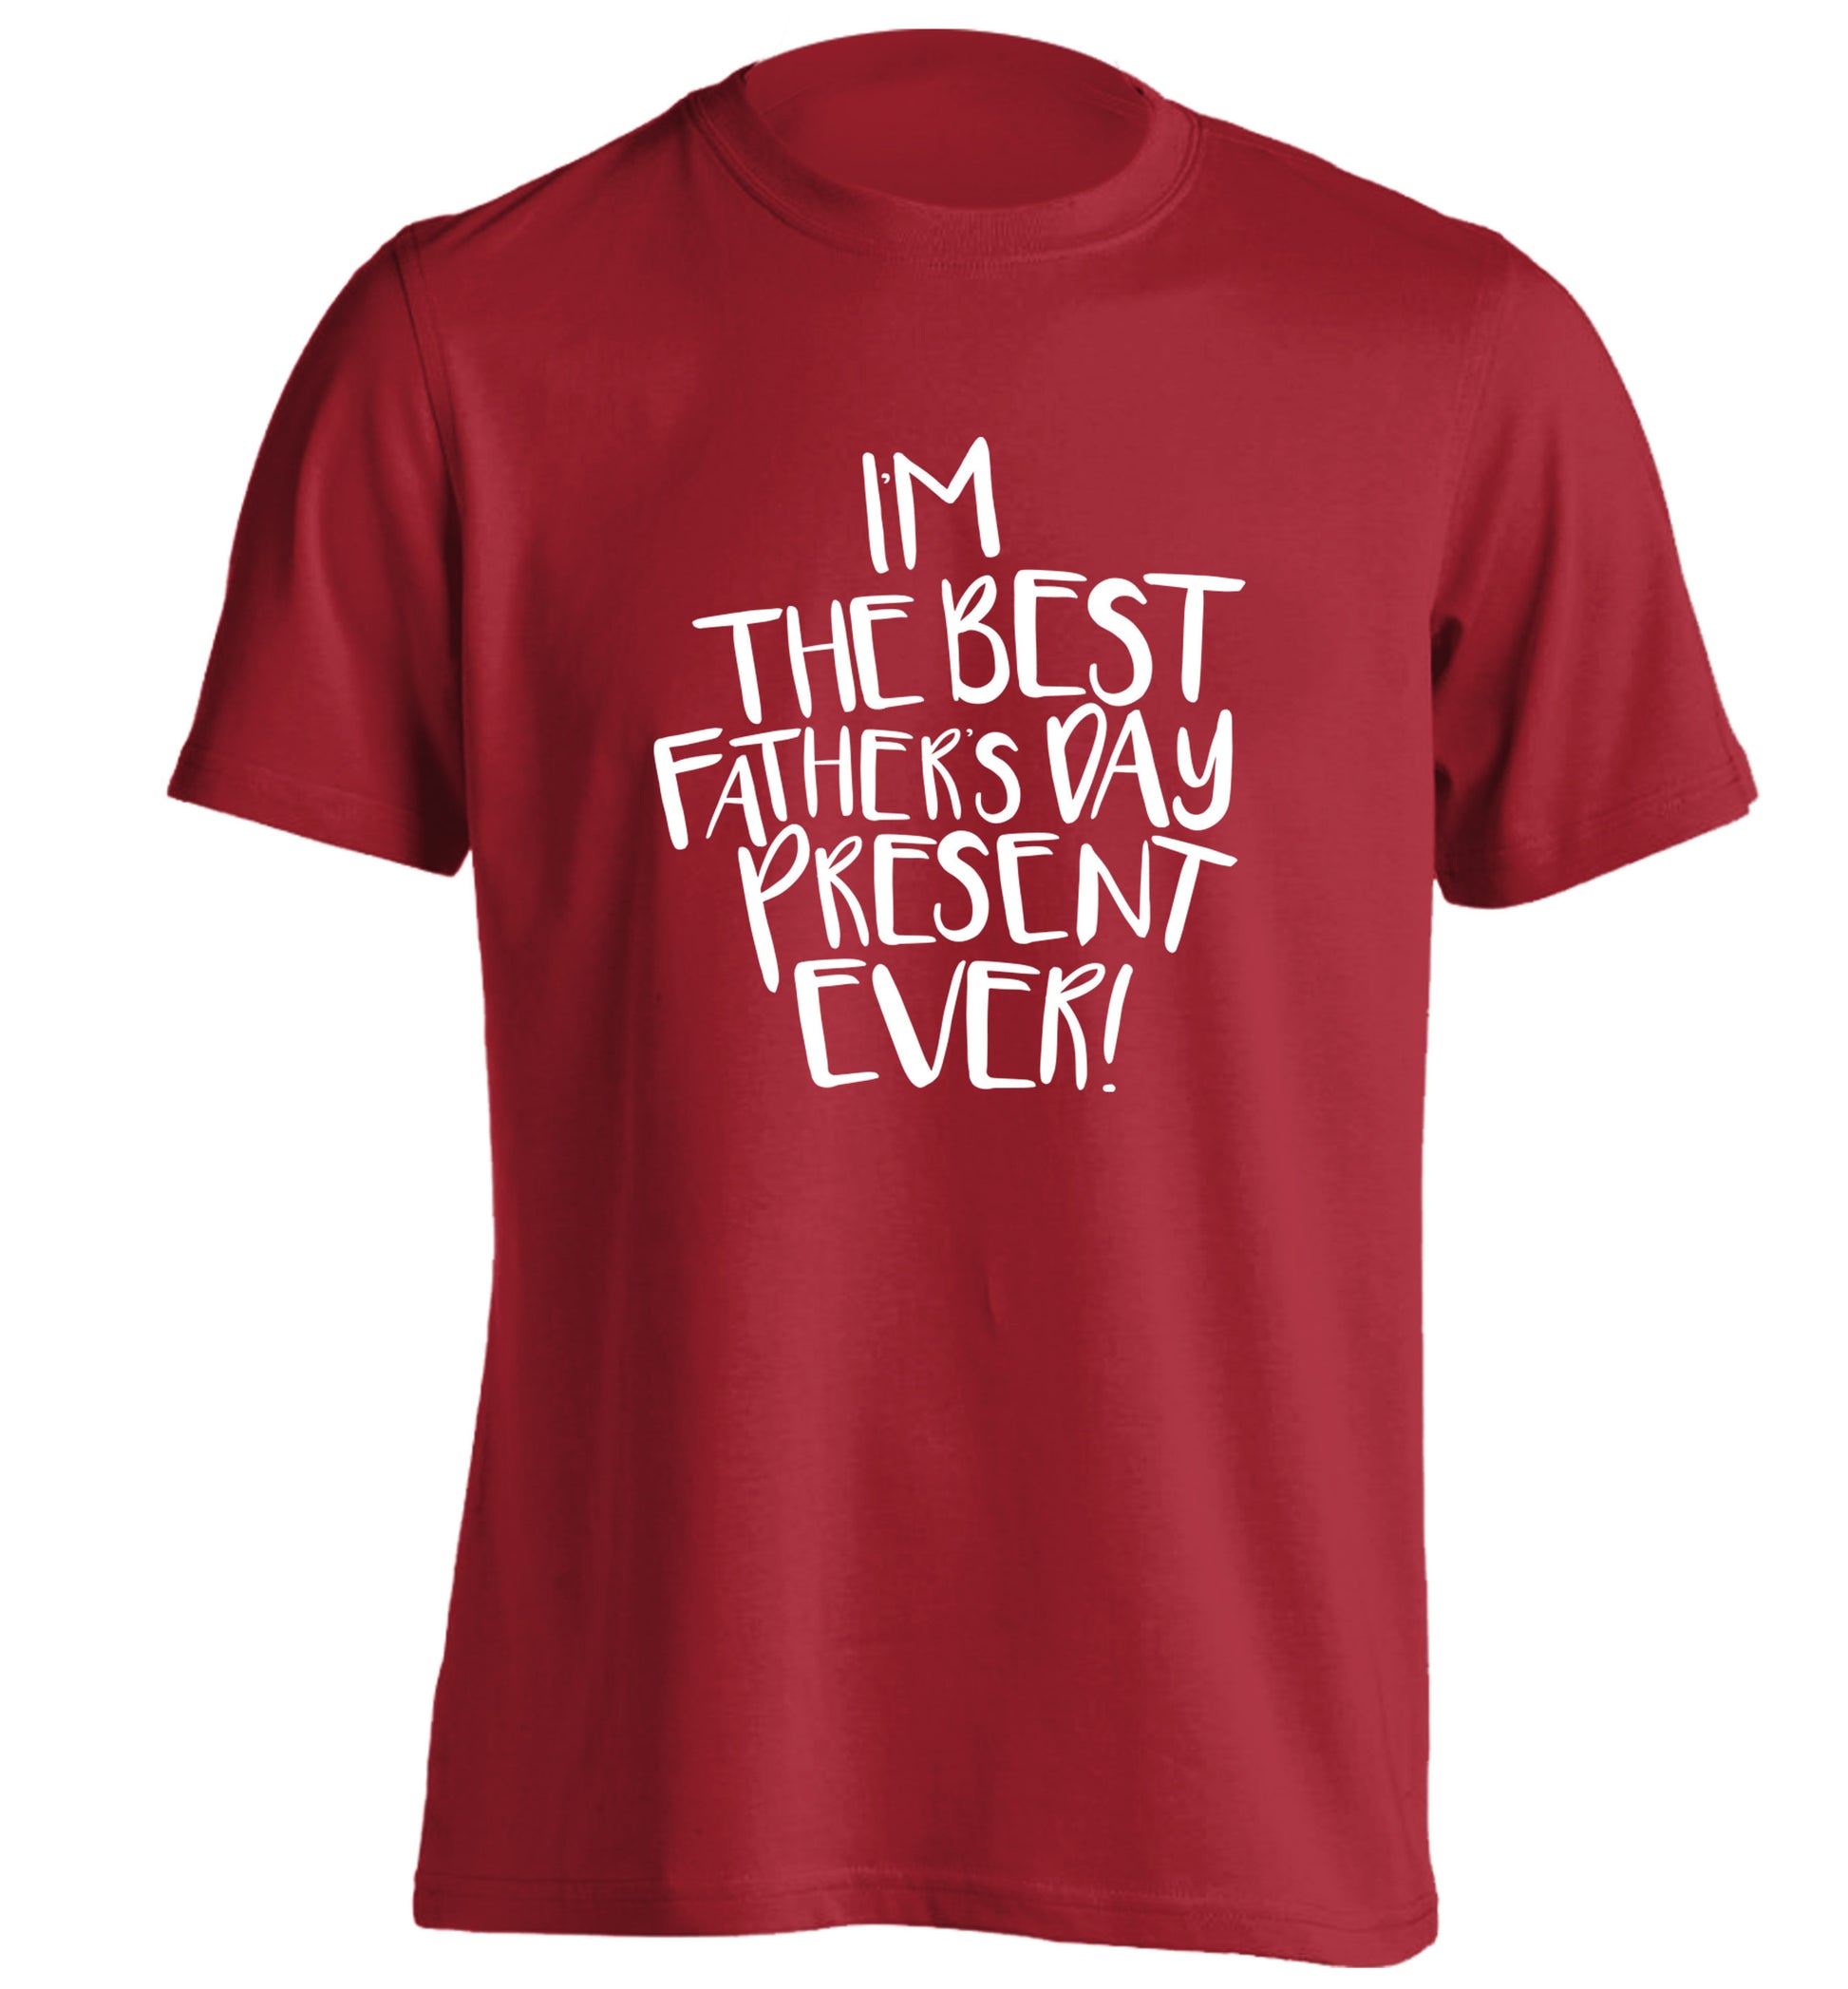 I'm the best father's day present ever! adults unisex red Tshirt 2XL